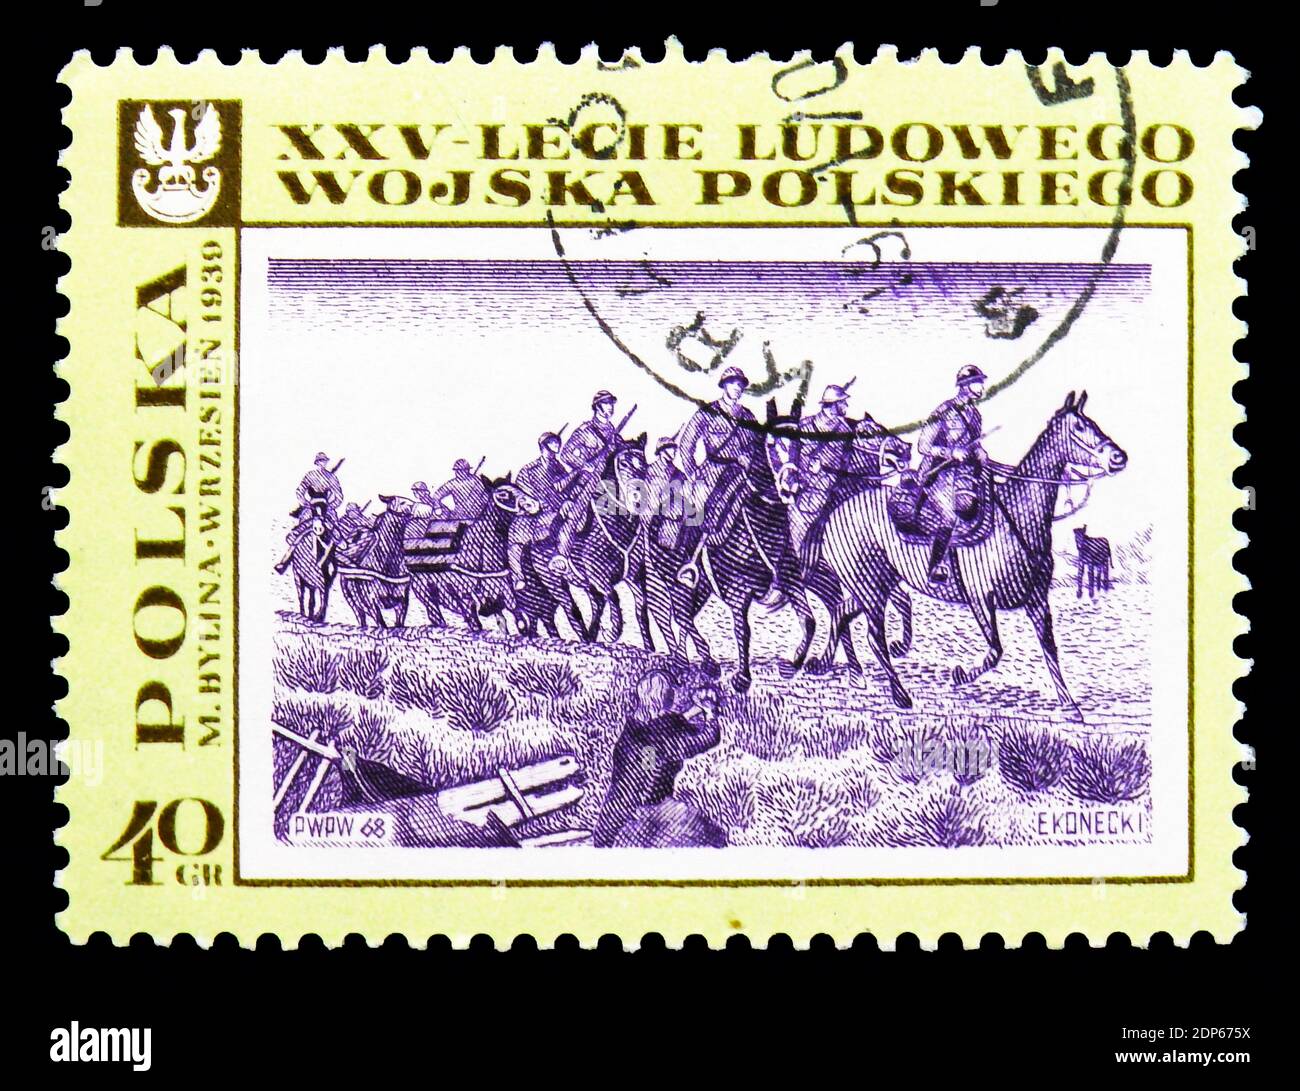 MOSCOW, RUSSIA - SEPTEMBER 15, 2018: A stamp printed in Poland shows 'September, 1939' by M. Bylina, Paintings Polish People's Army, 25th Anniversary Stock Photo